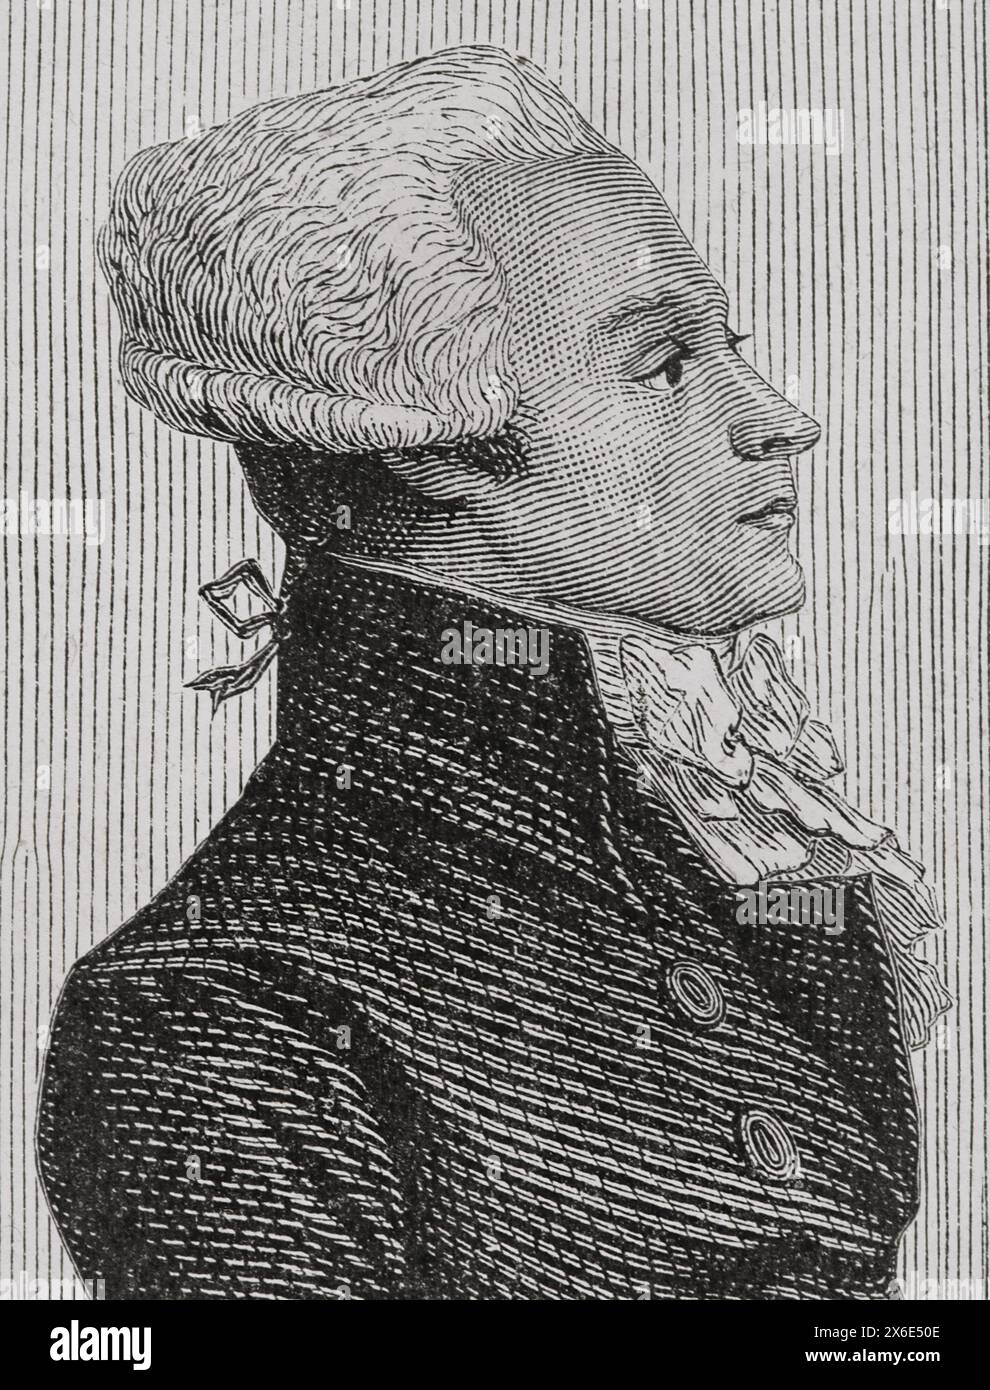 Maximilien Robespierre (1758-1794). French writer, lawyer and politician. One of the leaders of the French Revolution. President of the National Convention twice, member of the Jacobins and the Committee of Public Safety. Portrait of Robespierre speaking in Convention. Drawing by E. Viollat. Engraving by Pannemaker. Detail. 'History of the French Revolution'. Volume I, 1876. Stock Photo